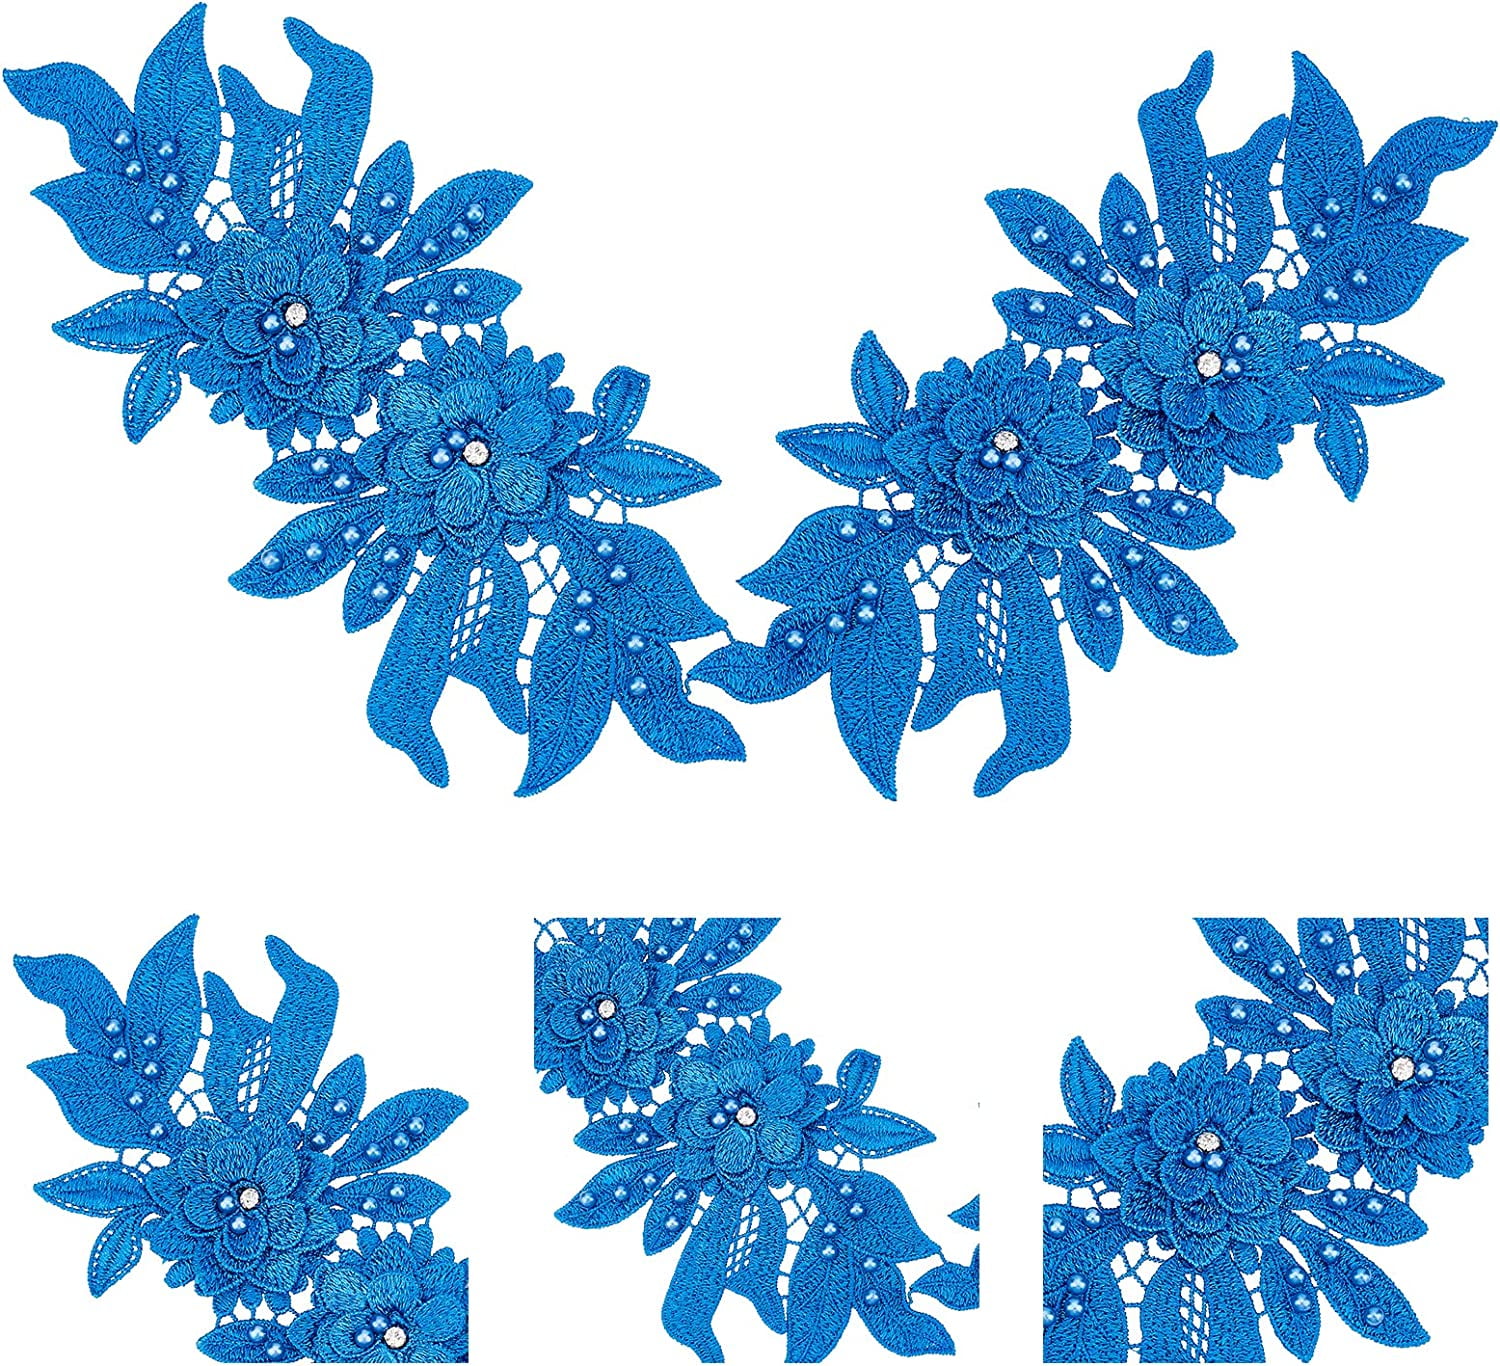 1 Pair Lace Flower Applique, Bead Pearl Patches Embroidery Floral Beaded  Sequins Motif Rhinestones Trim Fabric Sew On Appliques For Sewing Wedding  Bri